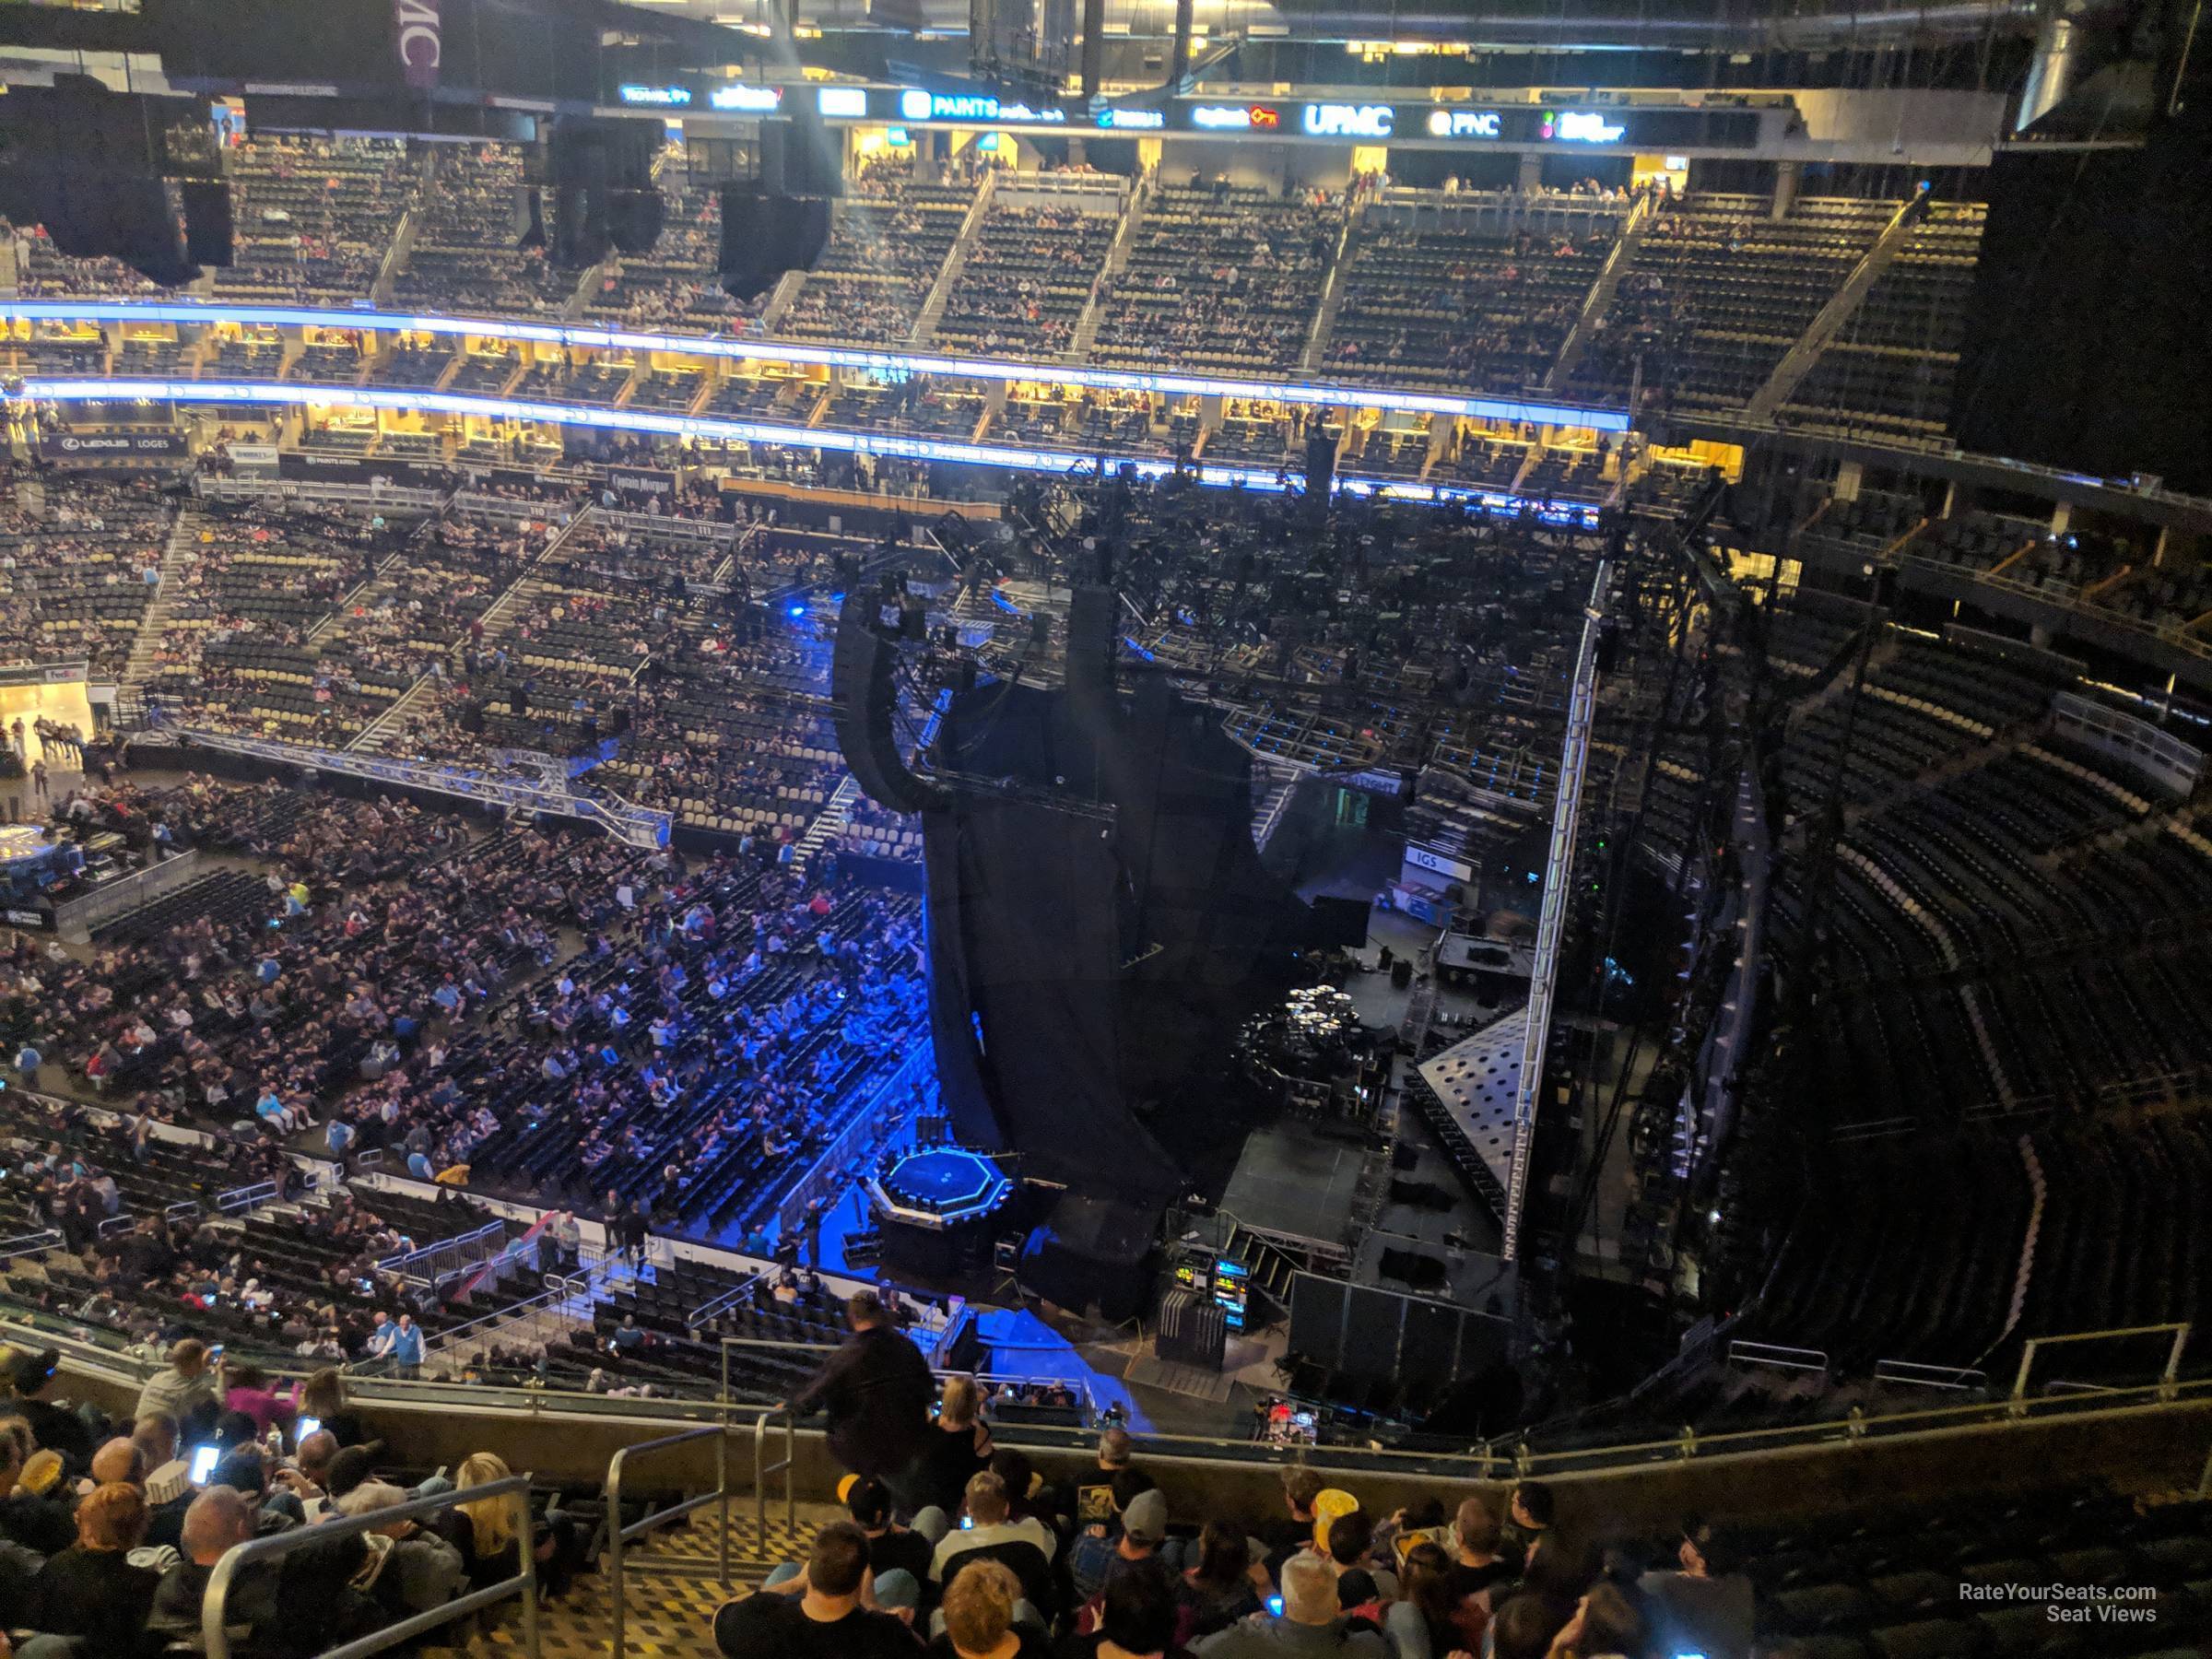 section 233, row l seat view  for concert - ppg paints arena